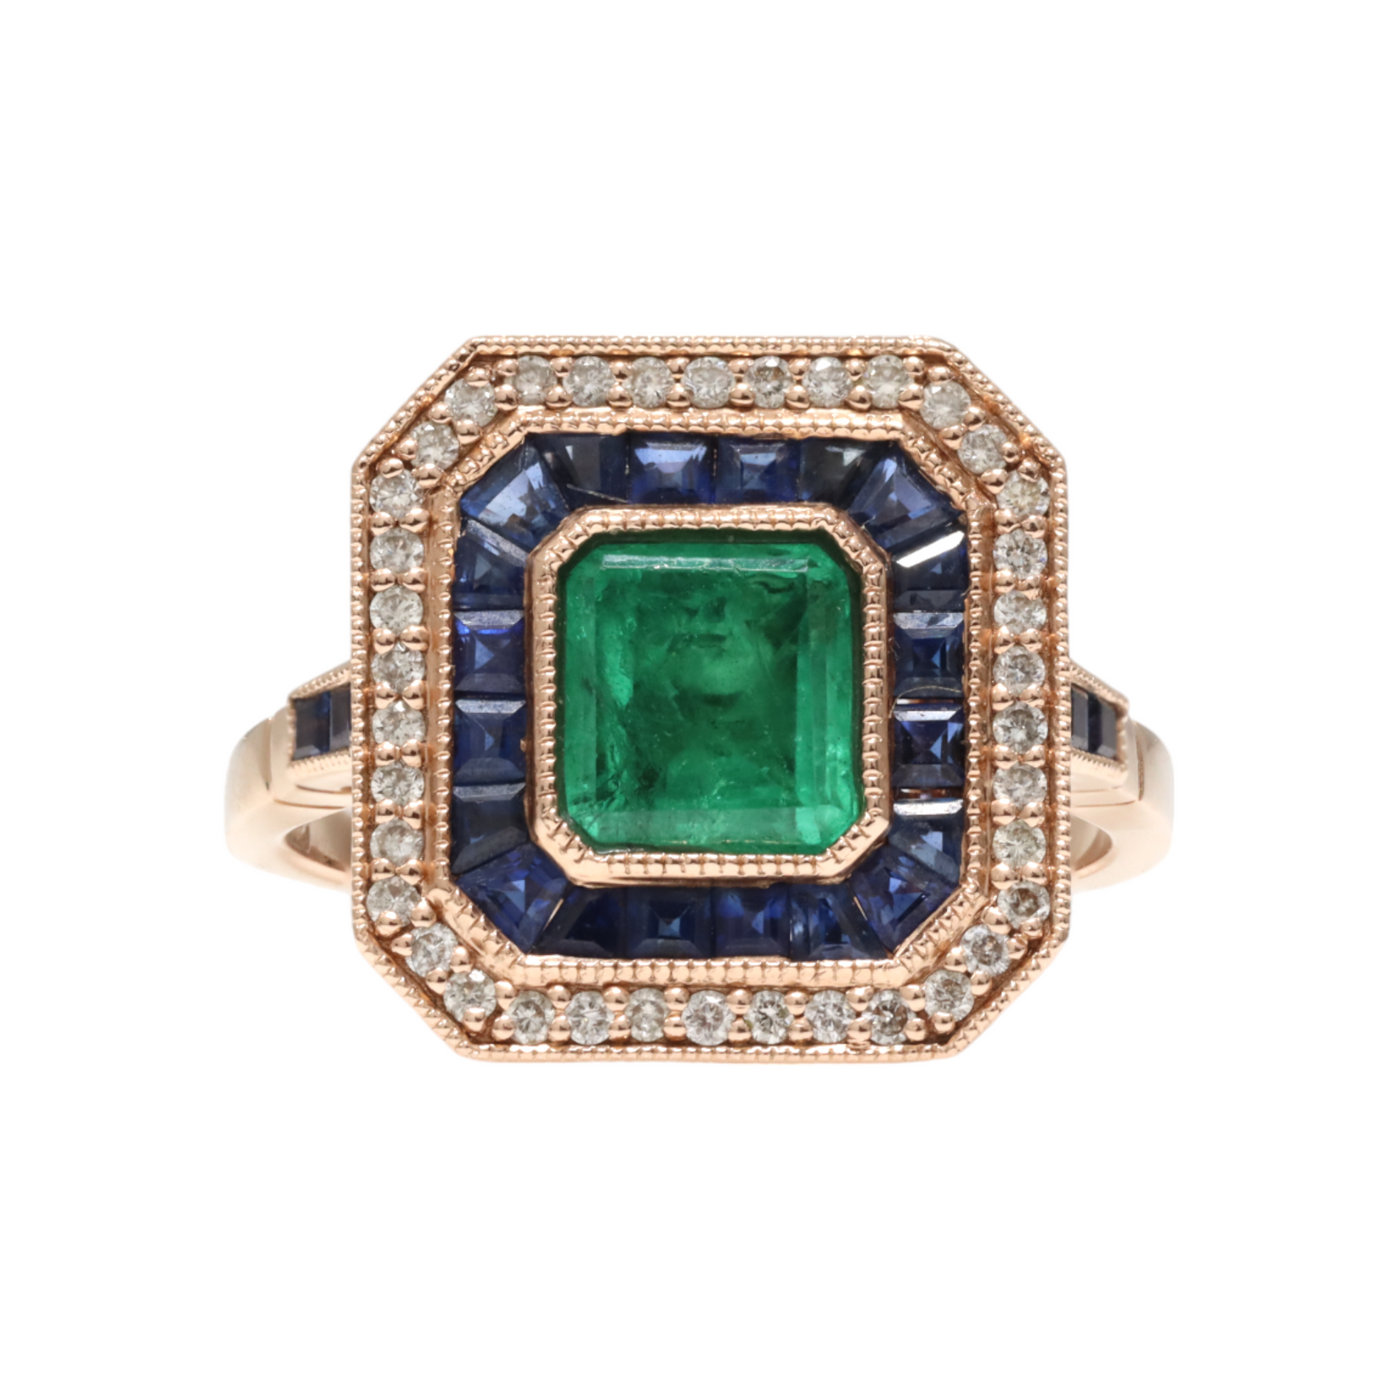 Emerald, Sapphires and Diamonds in 18ct RG